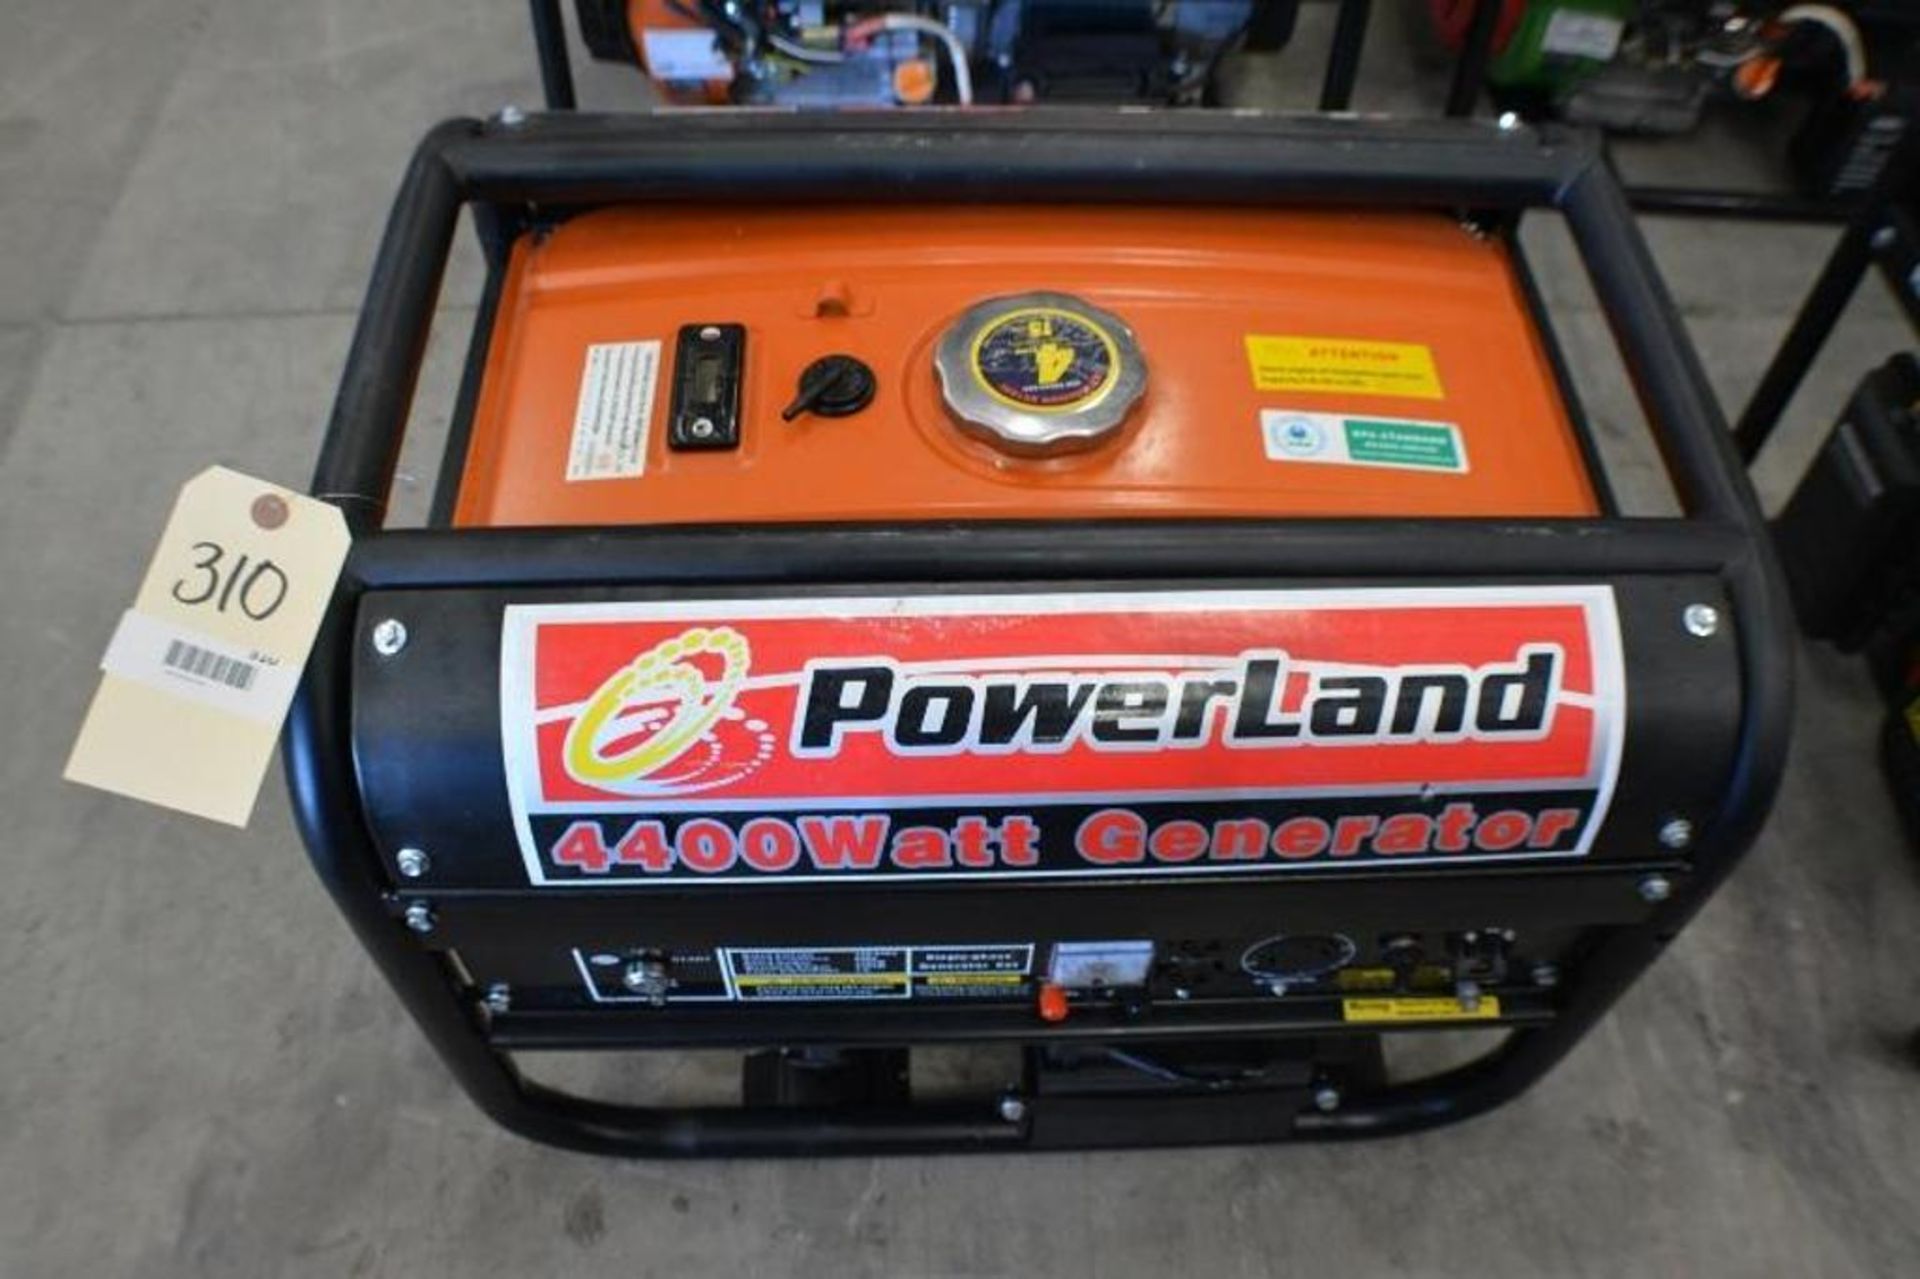 4400 Watts Gasoline Generator 7.5HP 120-240V with Electric Start by Powerland